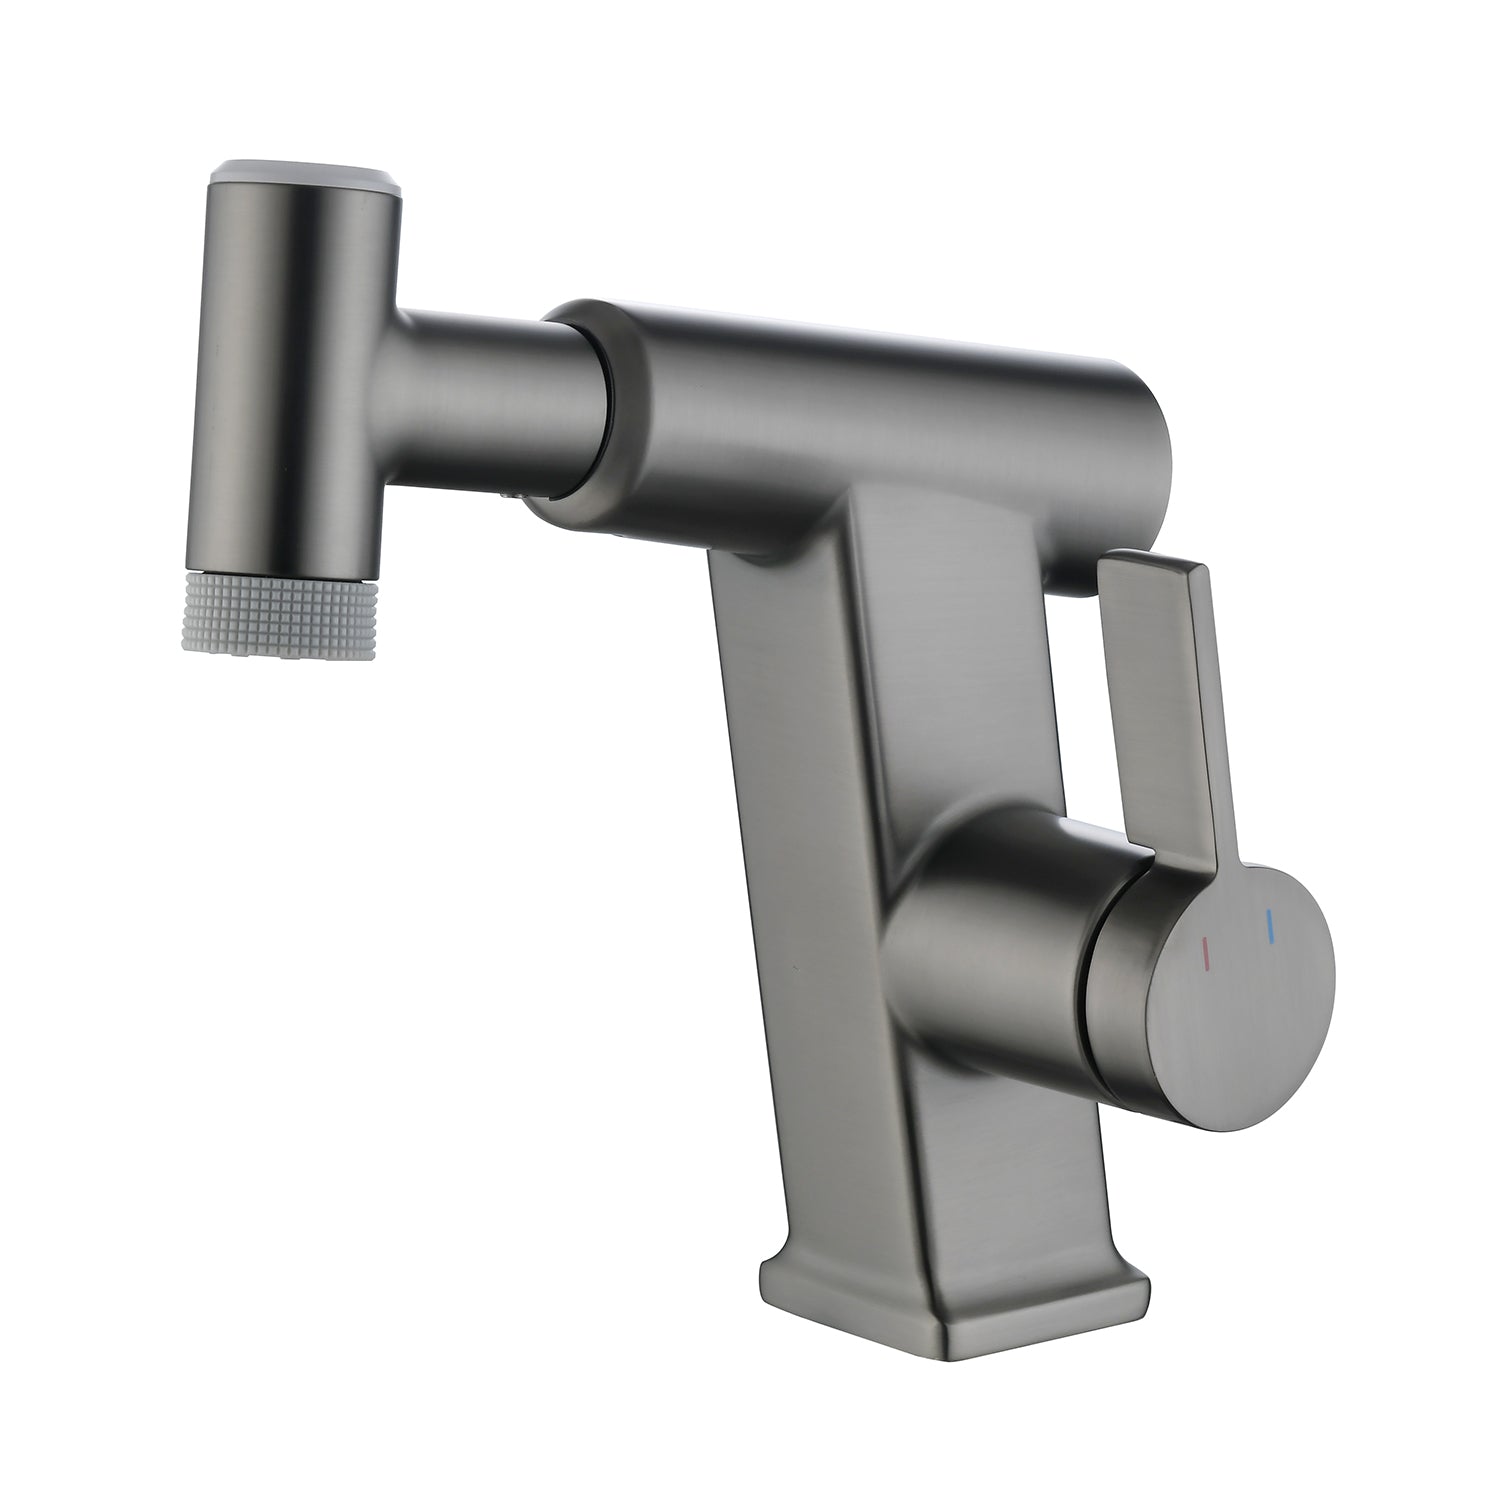 Lefton Pull-Out Faucet with Temperature Display & LED Light - BF2207 -Bathroom Faucets- Lefton Home